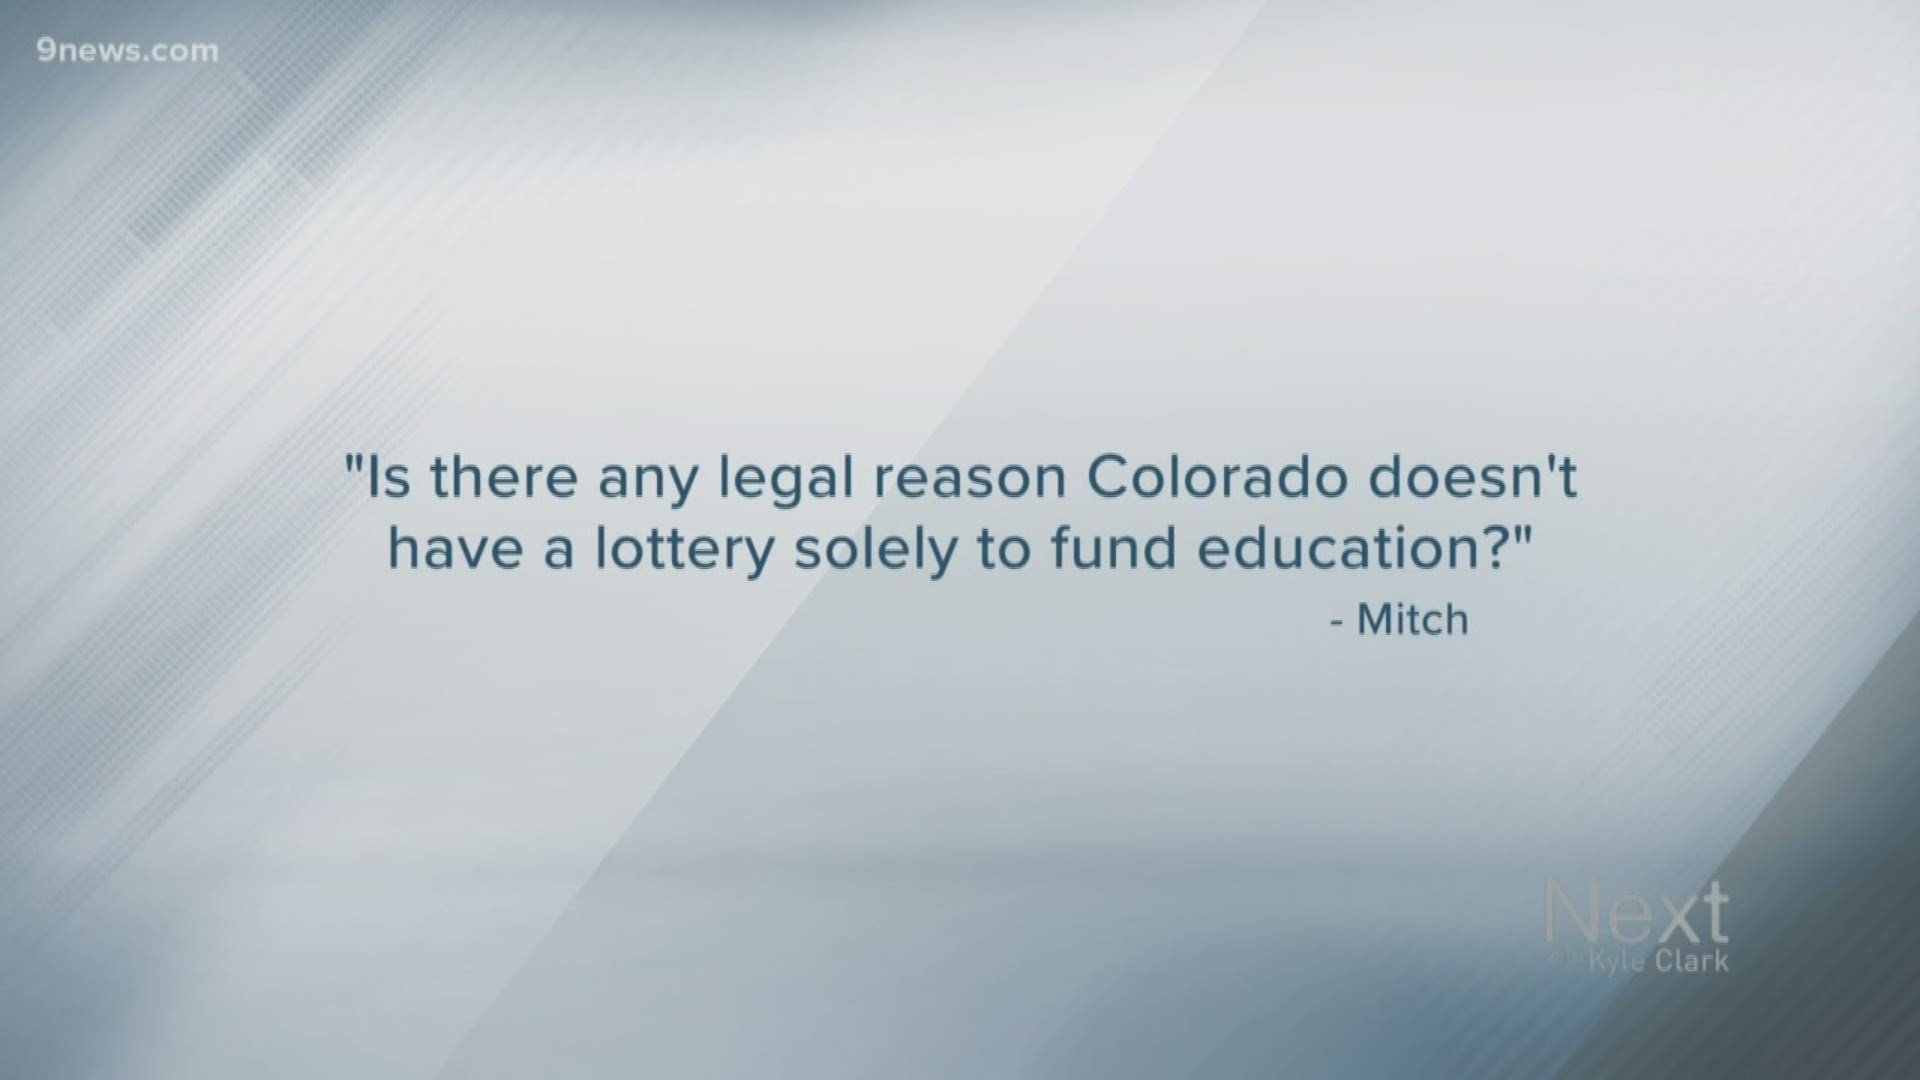 One Next viewer asked to find out more about education funding from the Colorado lottery.